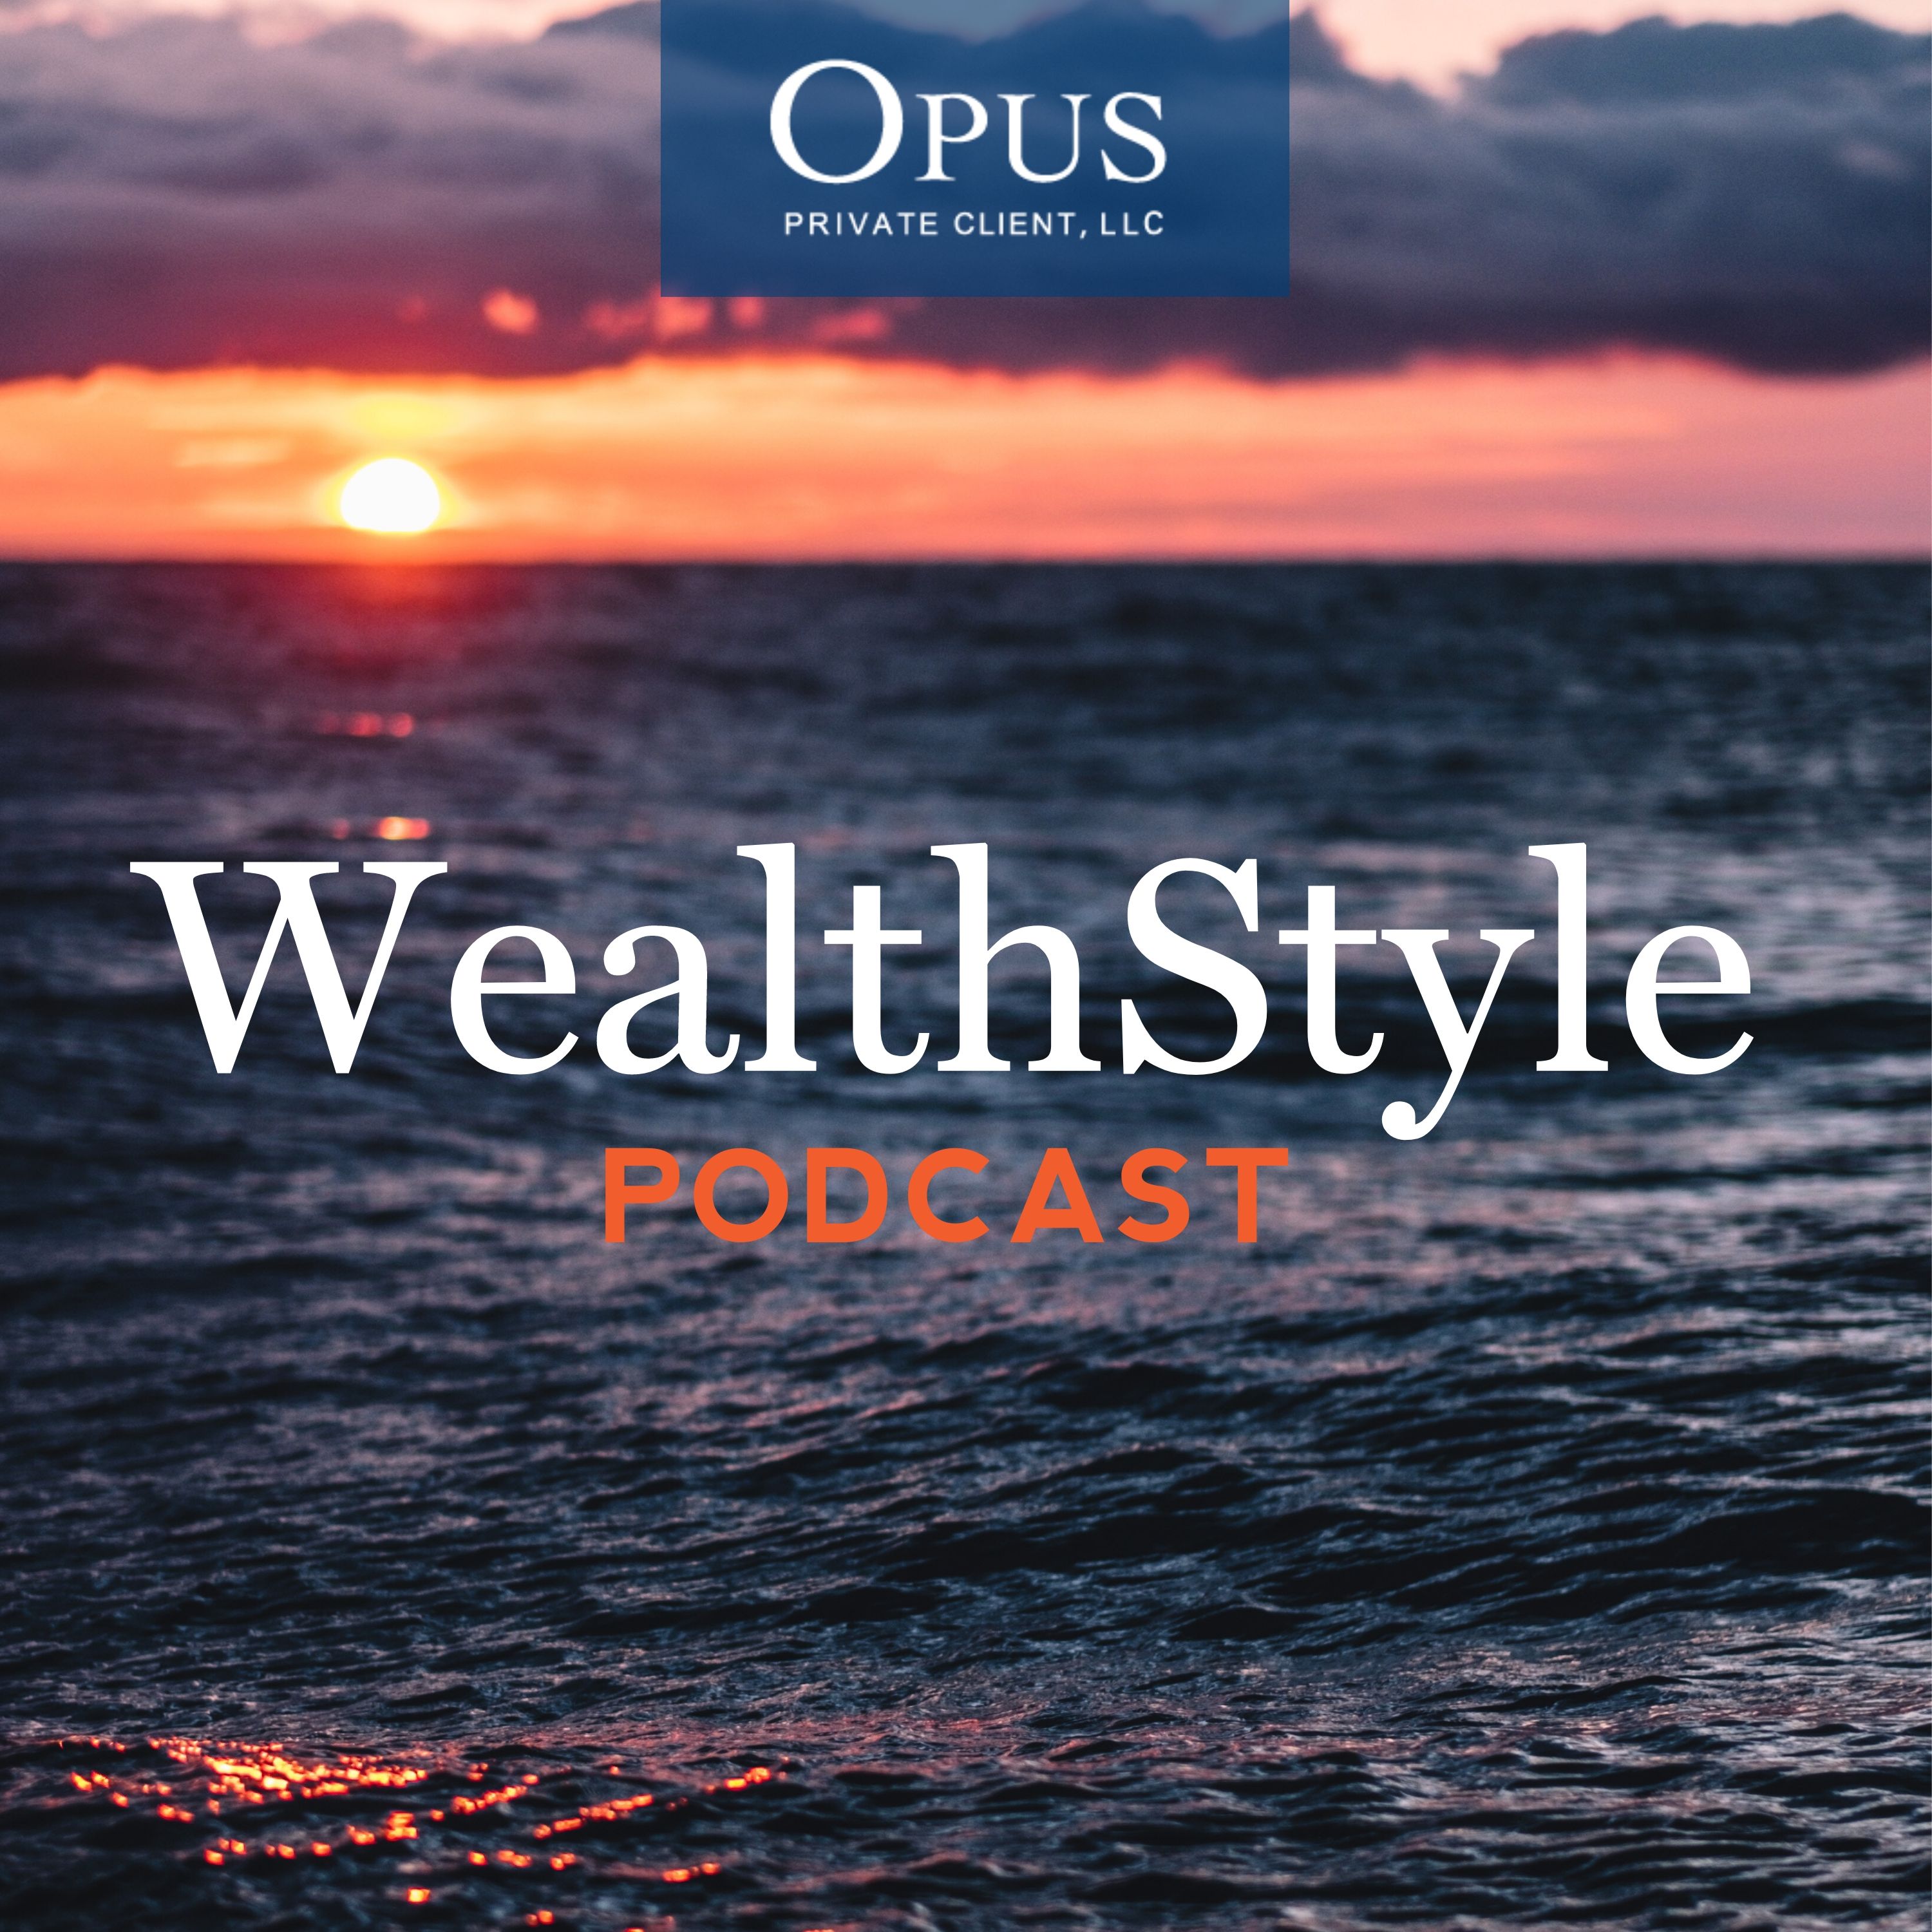 WealthStyle Podcast